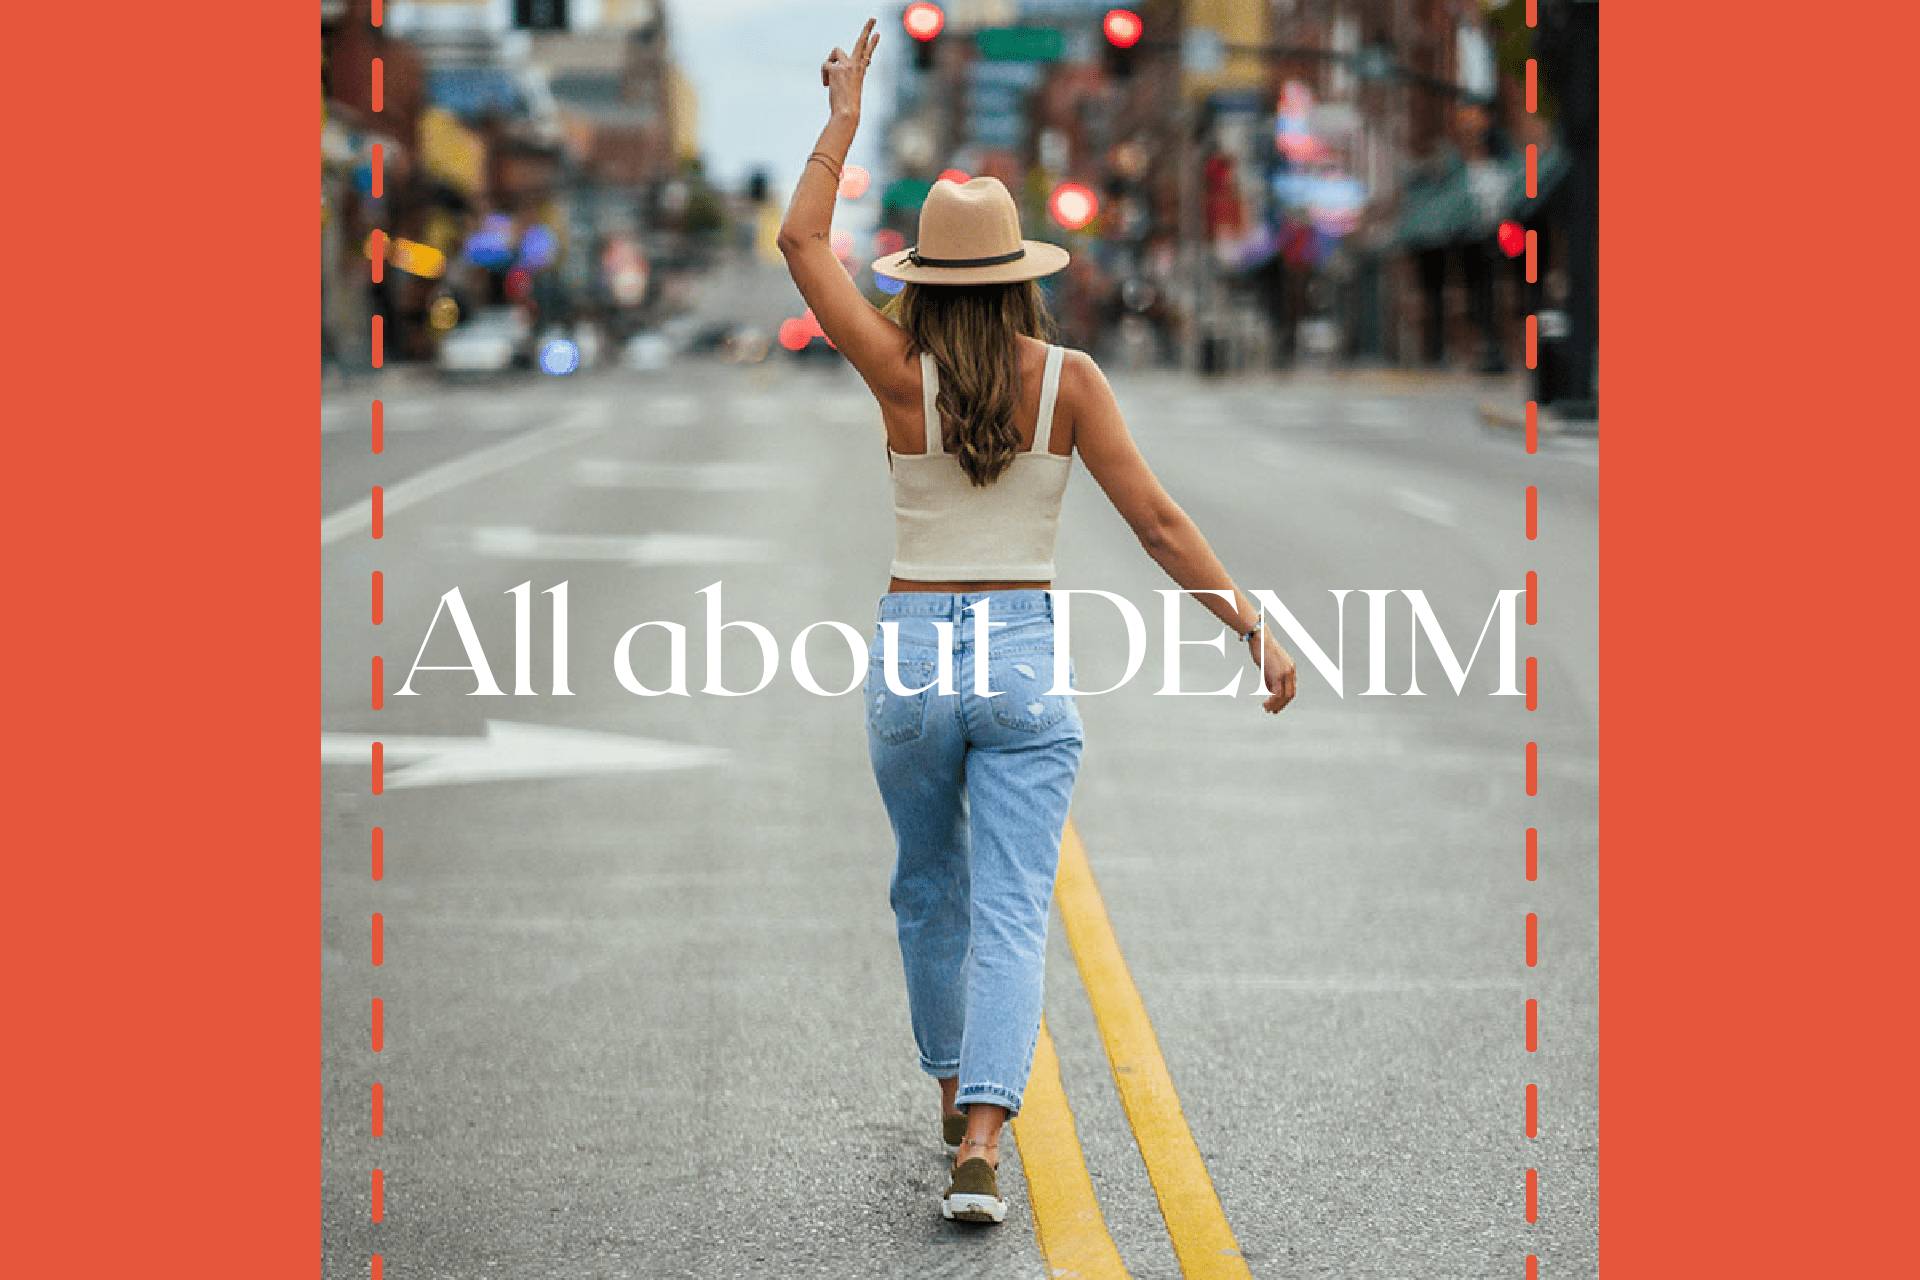 All about DENIM